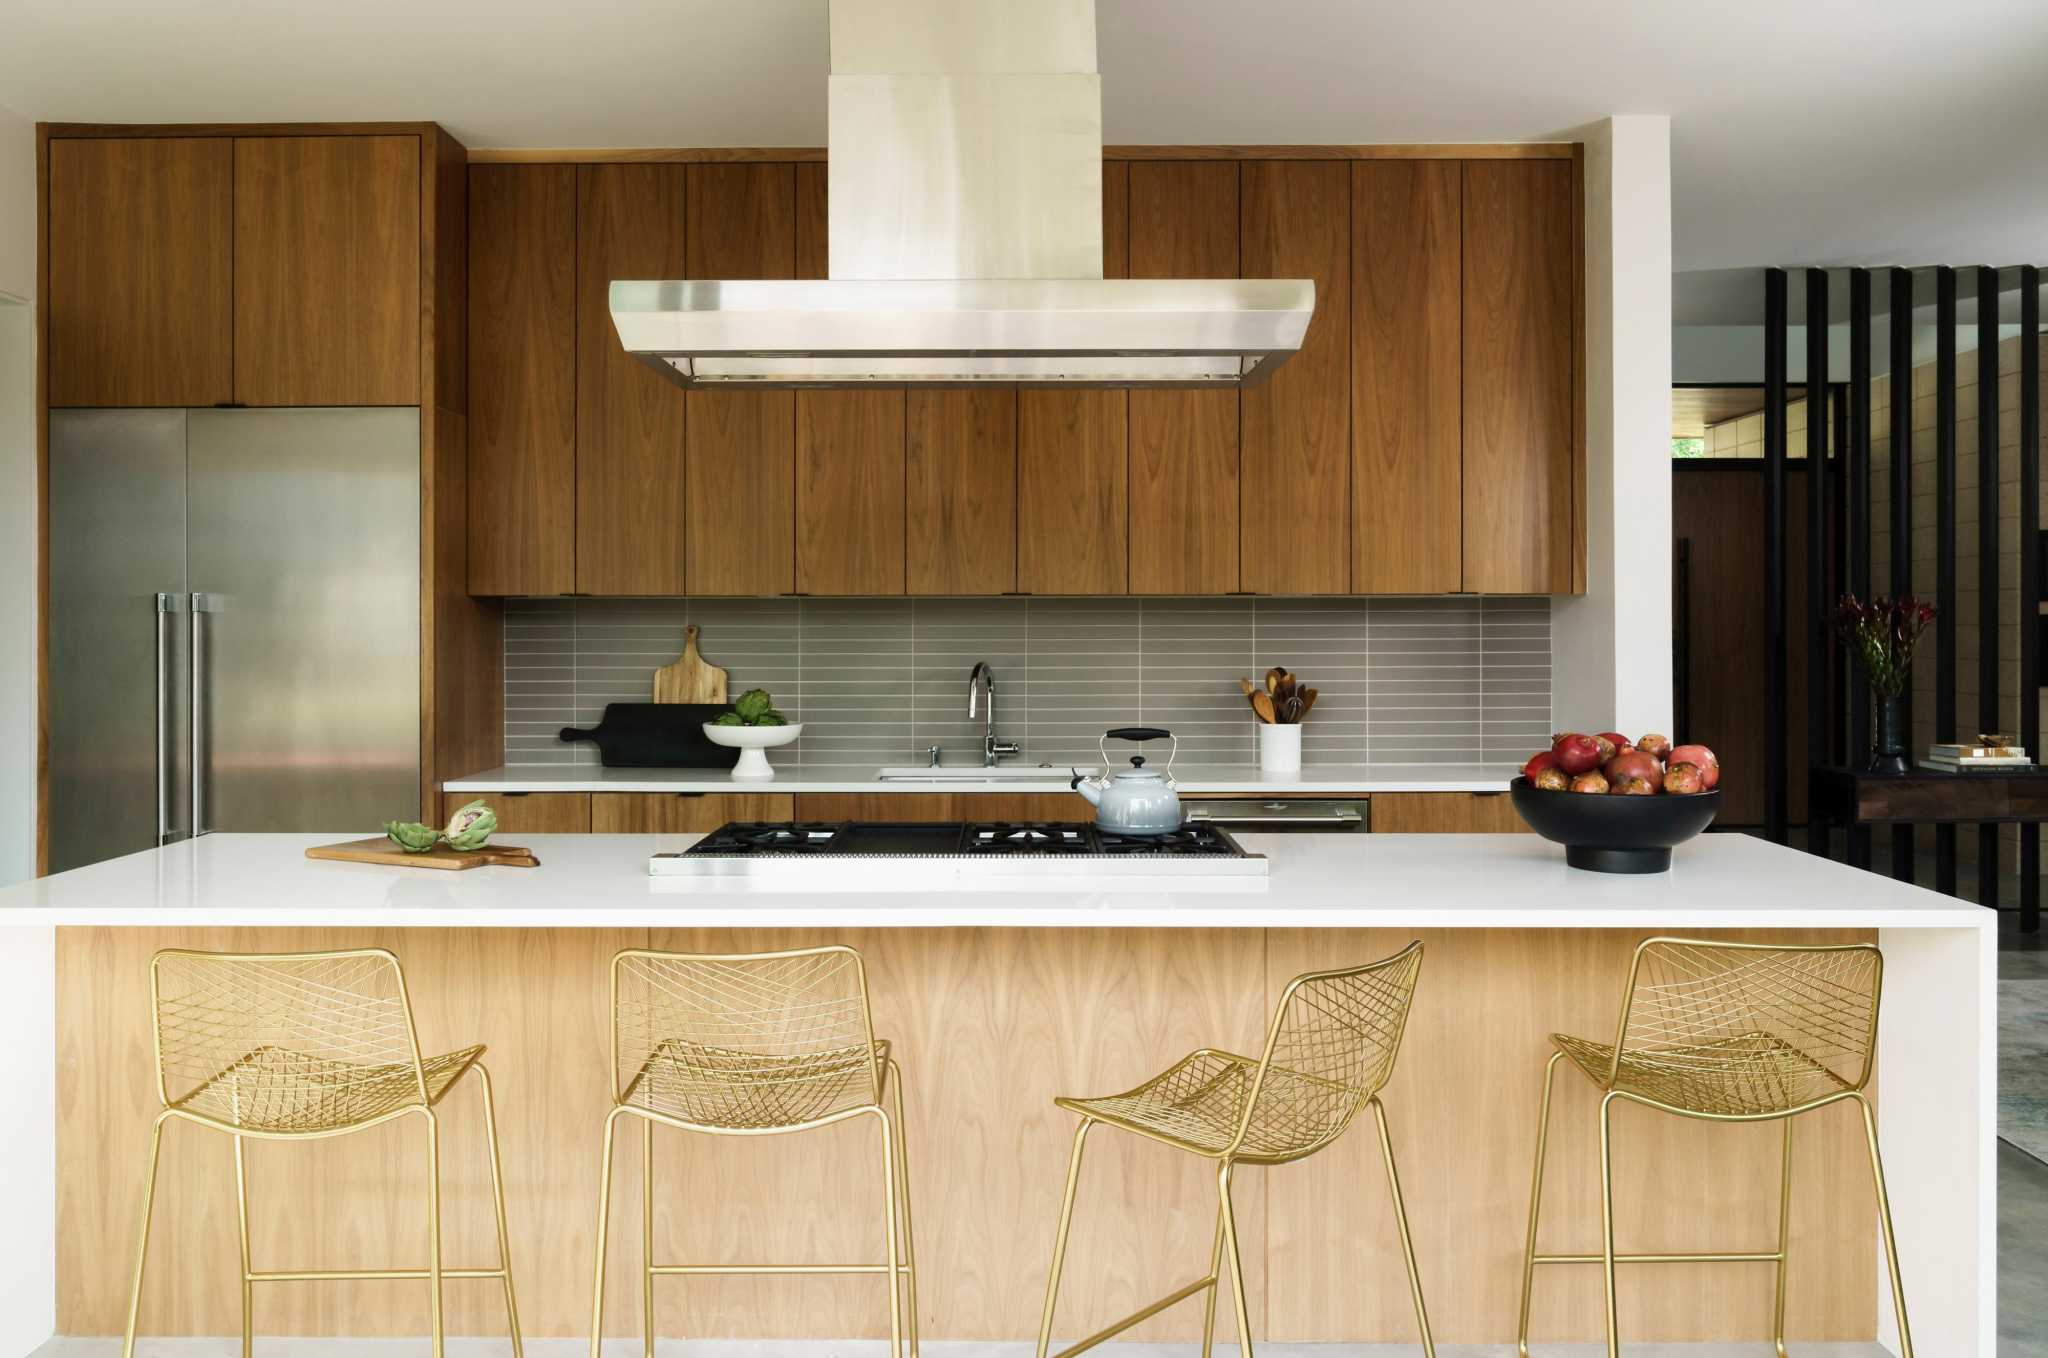 Houzz's 20 kitchen survey shows popular trends in natural materials